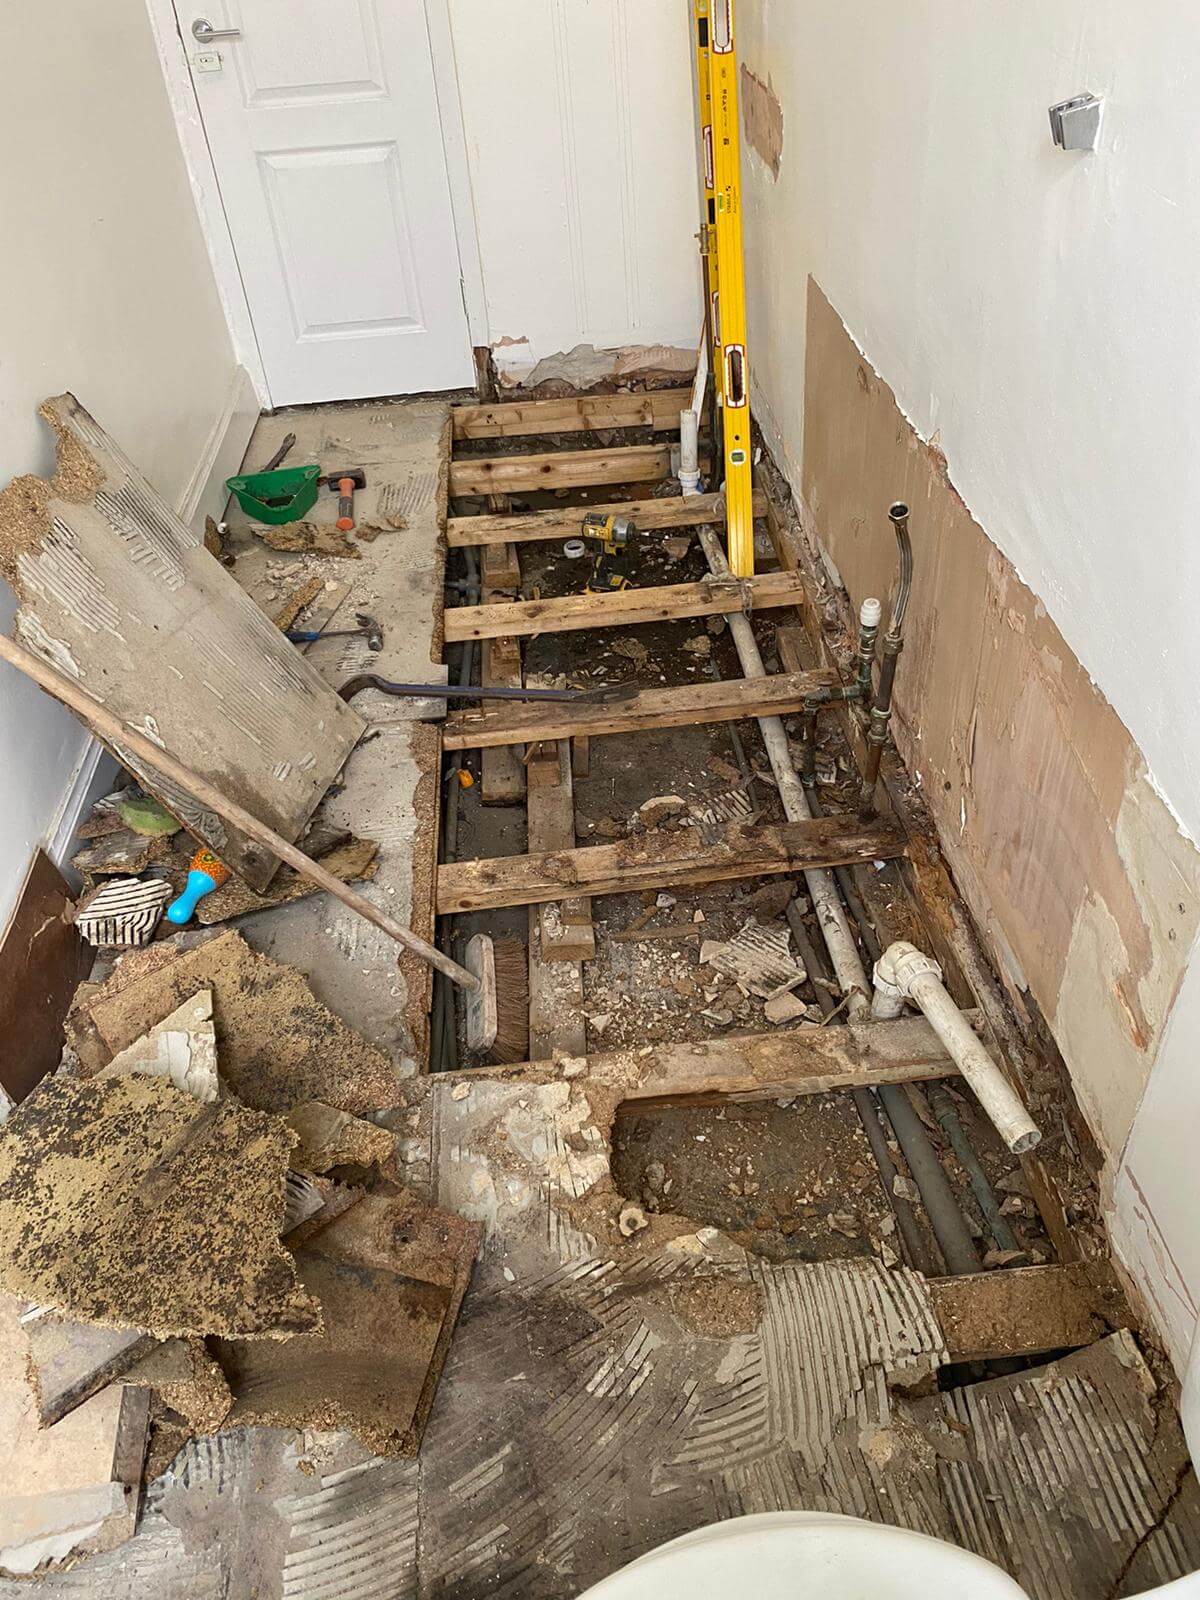 New bathroom fitting revealed rotten floor joists that